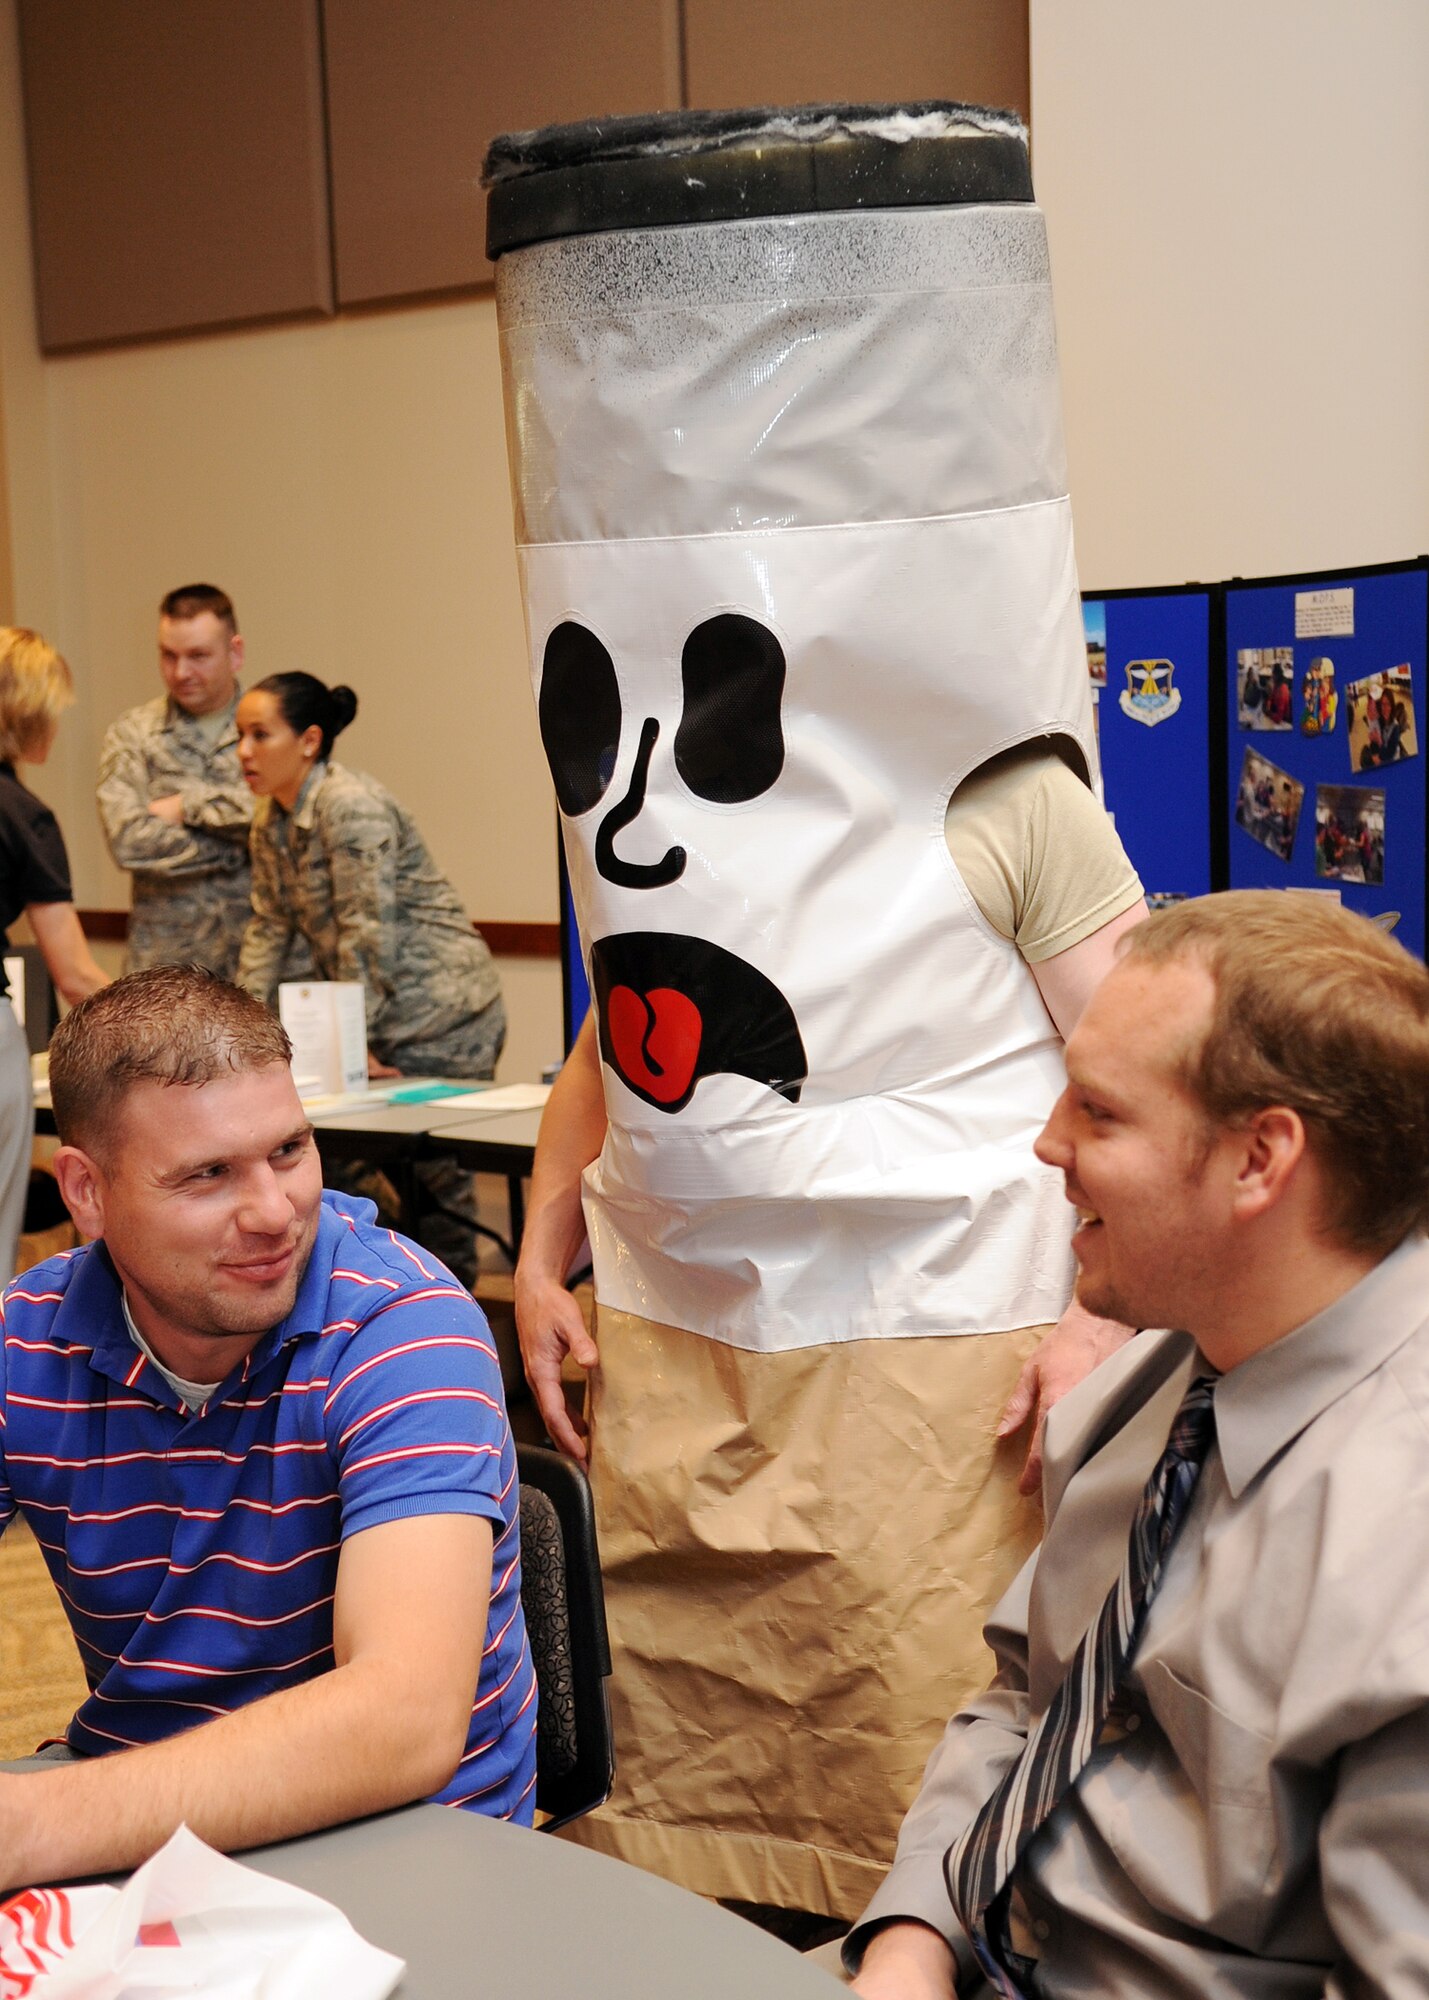 BUCKLEY AIR FORCE BASE, Colo. -- An anti-smoking mascot made an appearance at the Save-a-Life Tour and Wingman Day May 20. ( U.S. Air Force Photo by Airman 1st Class Marcy Glass )